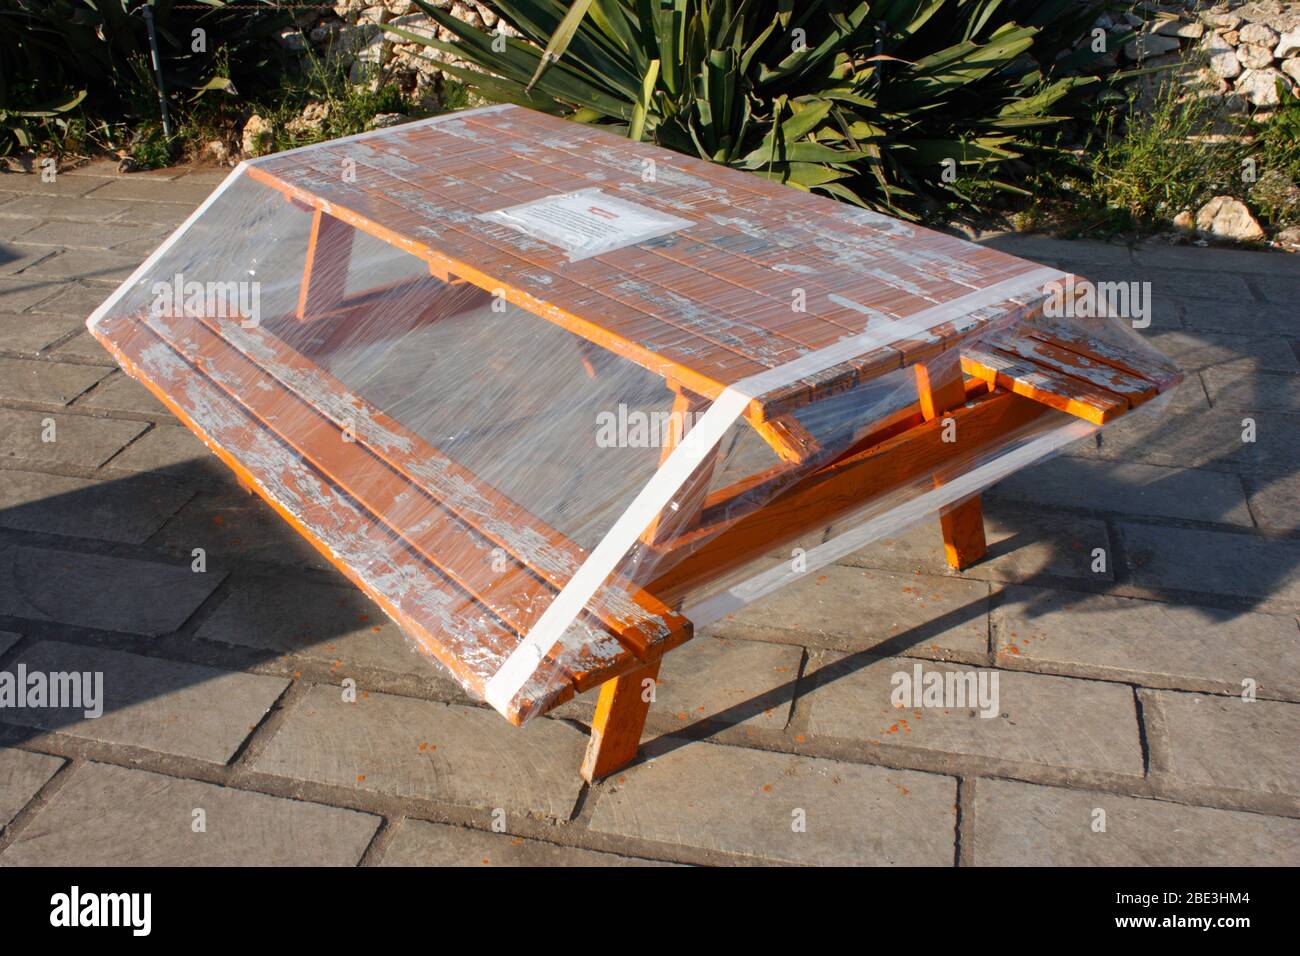 Picnic table covered in plastic film to enforce lockdown during the Covid-19 coronavirus pandemic in Europe Stock Photo